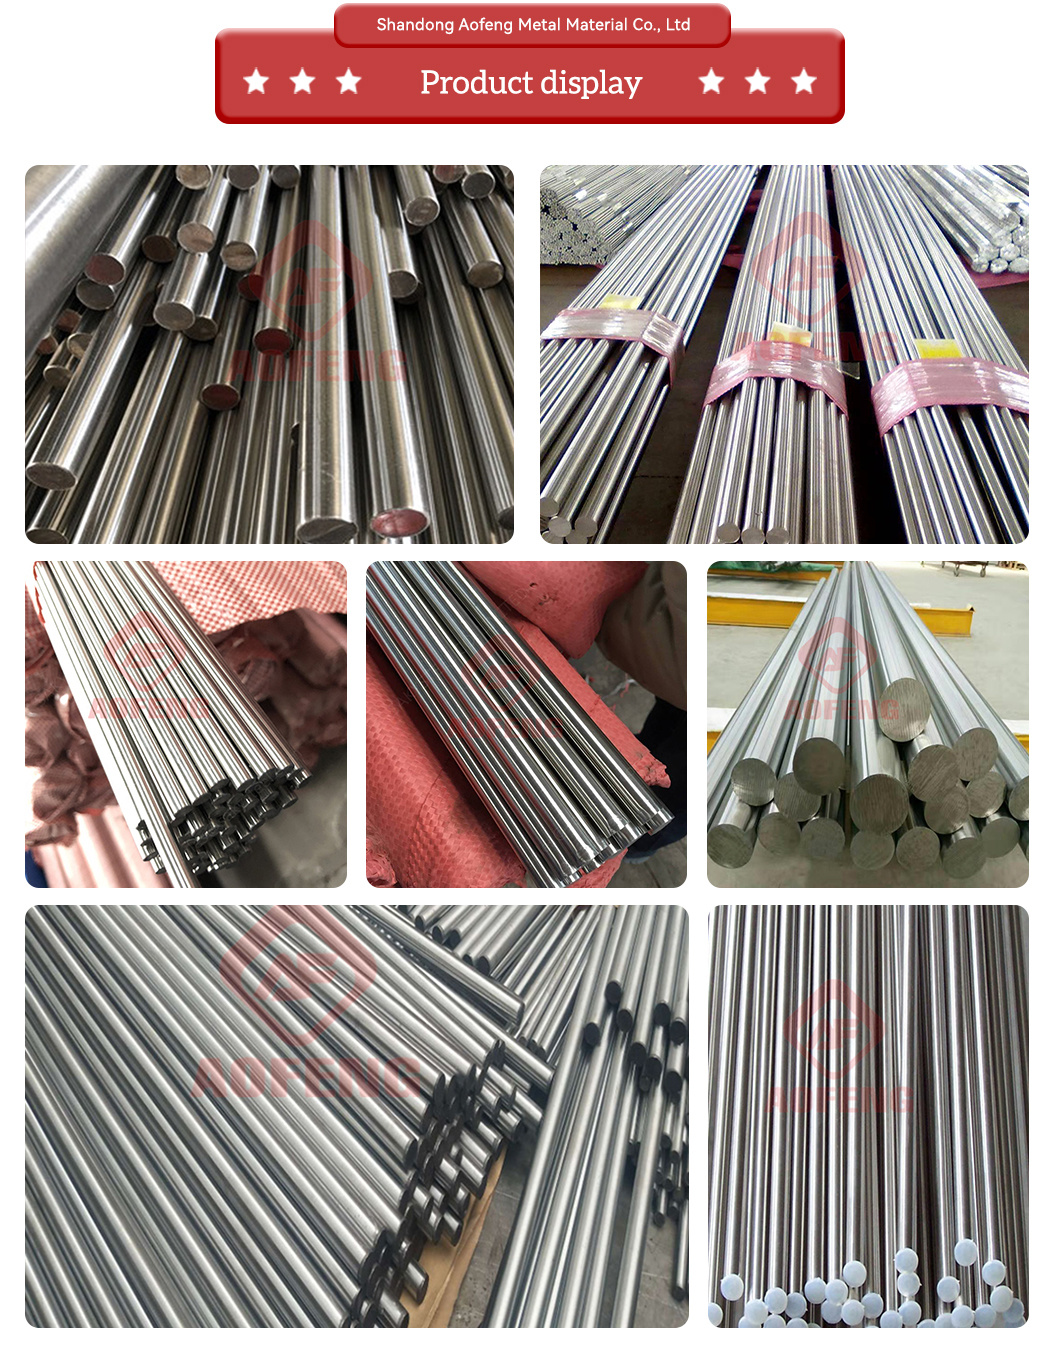 Stainless Steel Round Bar 9/16 Inch 1 Inch 3/8 Inch Diameter ASTM A276 420 Decorate Polished Stainless Steel Rod